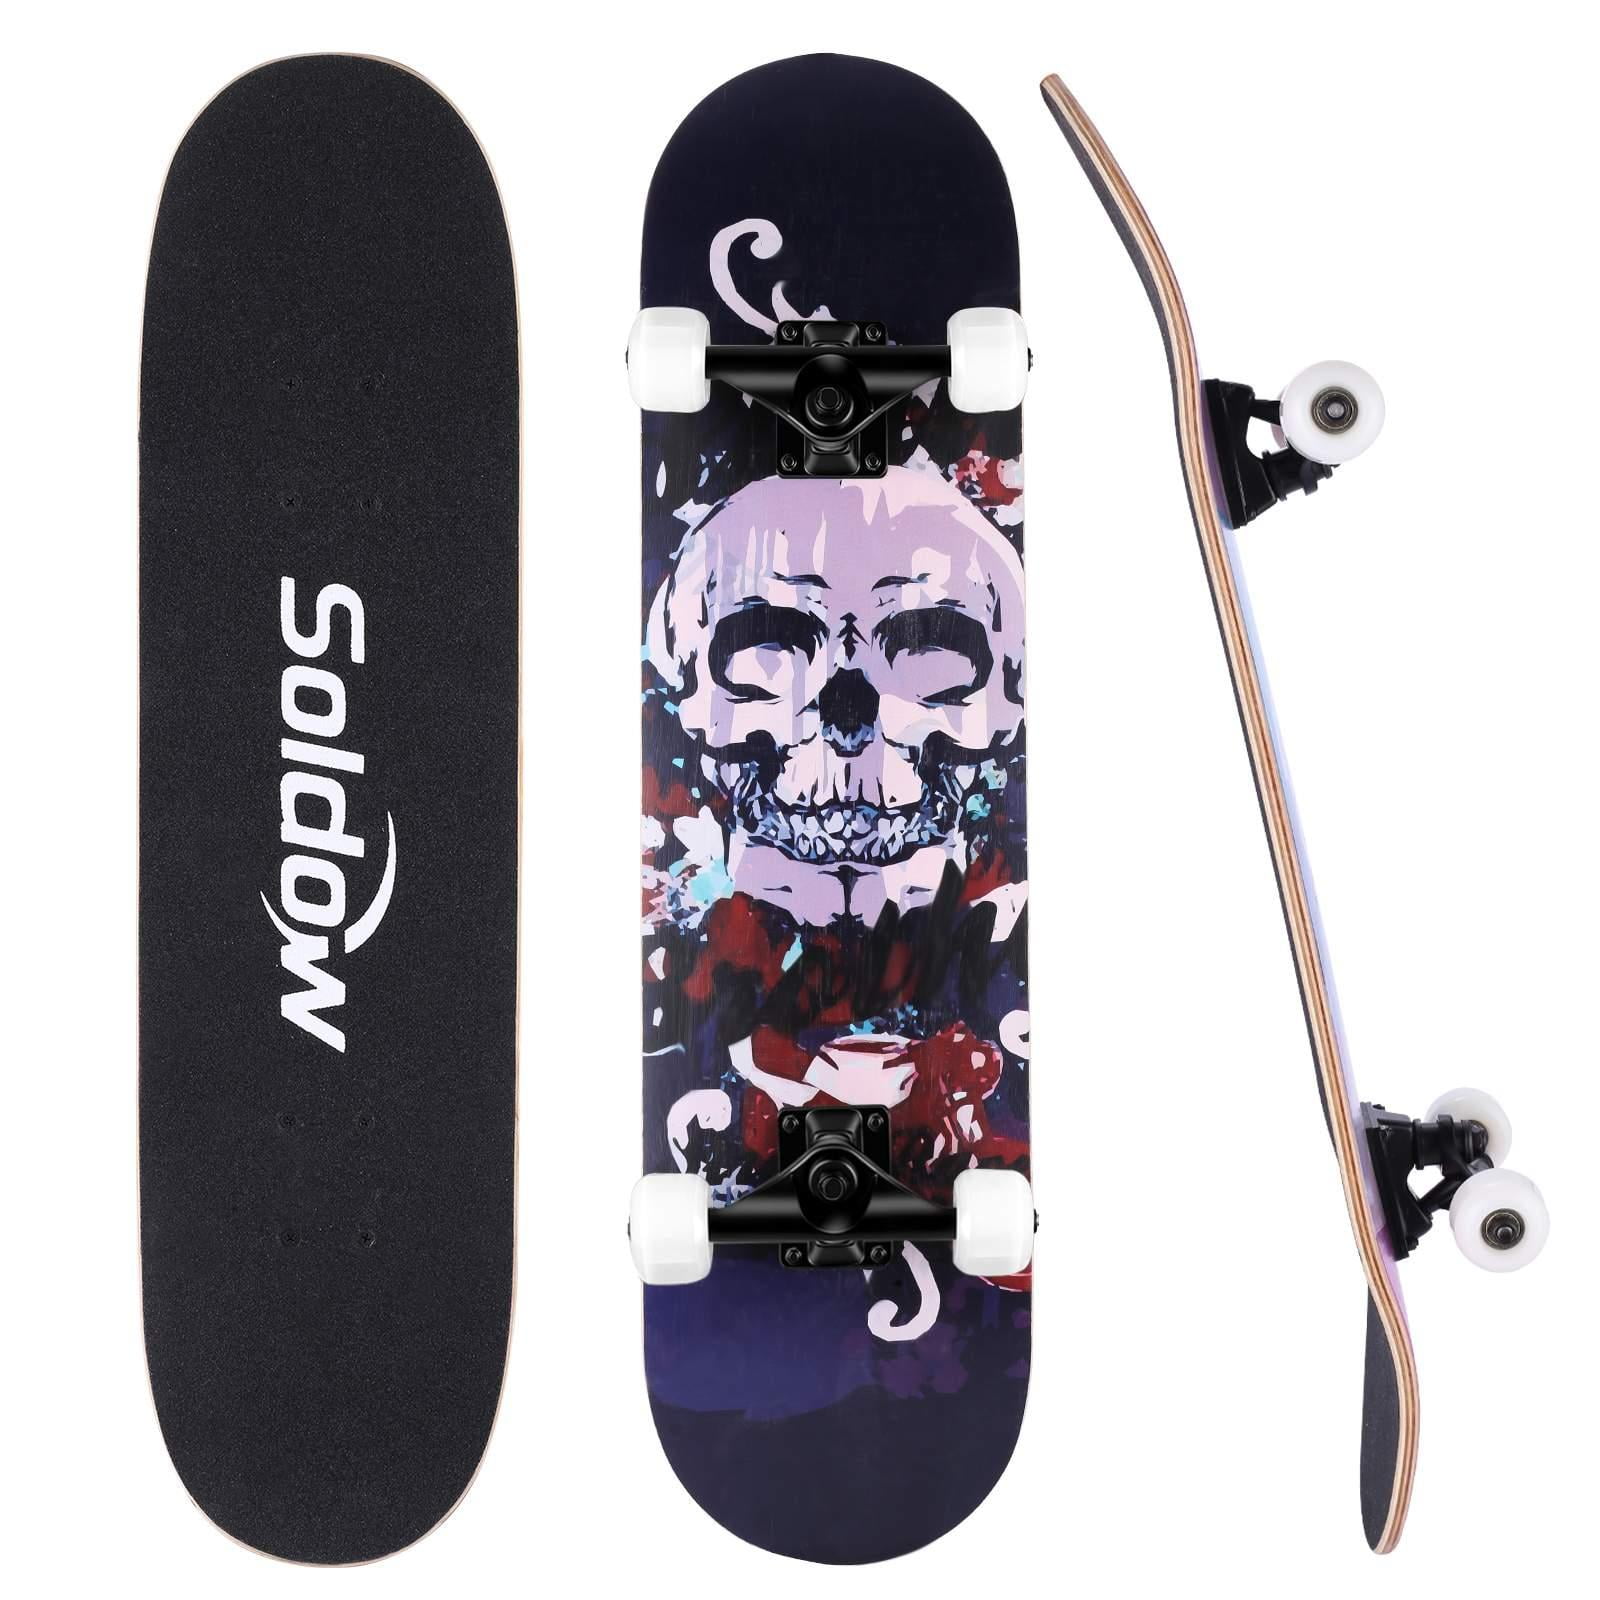 Wood Double Kick Concave Skate Board for Girls Boys Teens Adults with All-in-One Skate T-Tool 31 x 8Standard Skateboard for Kids Complete Skateboards for Beginners 8 Layer Maple Pro Cruiser